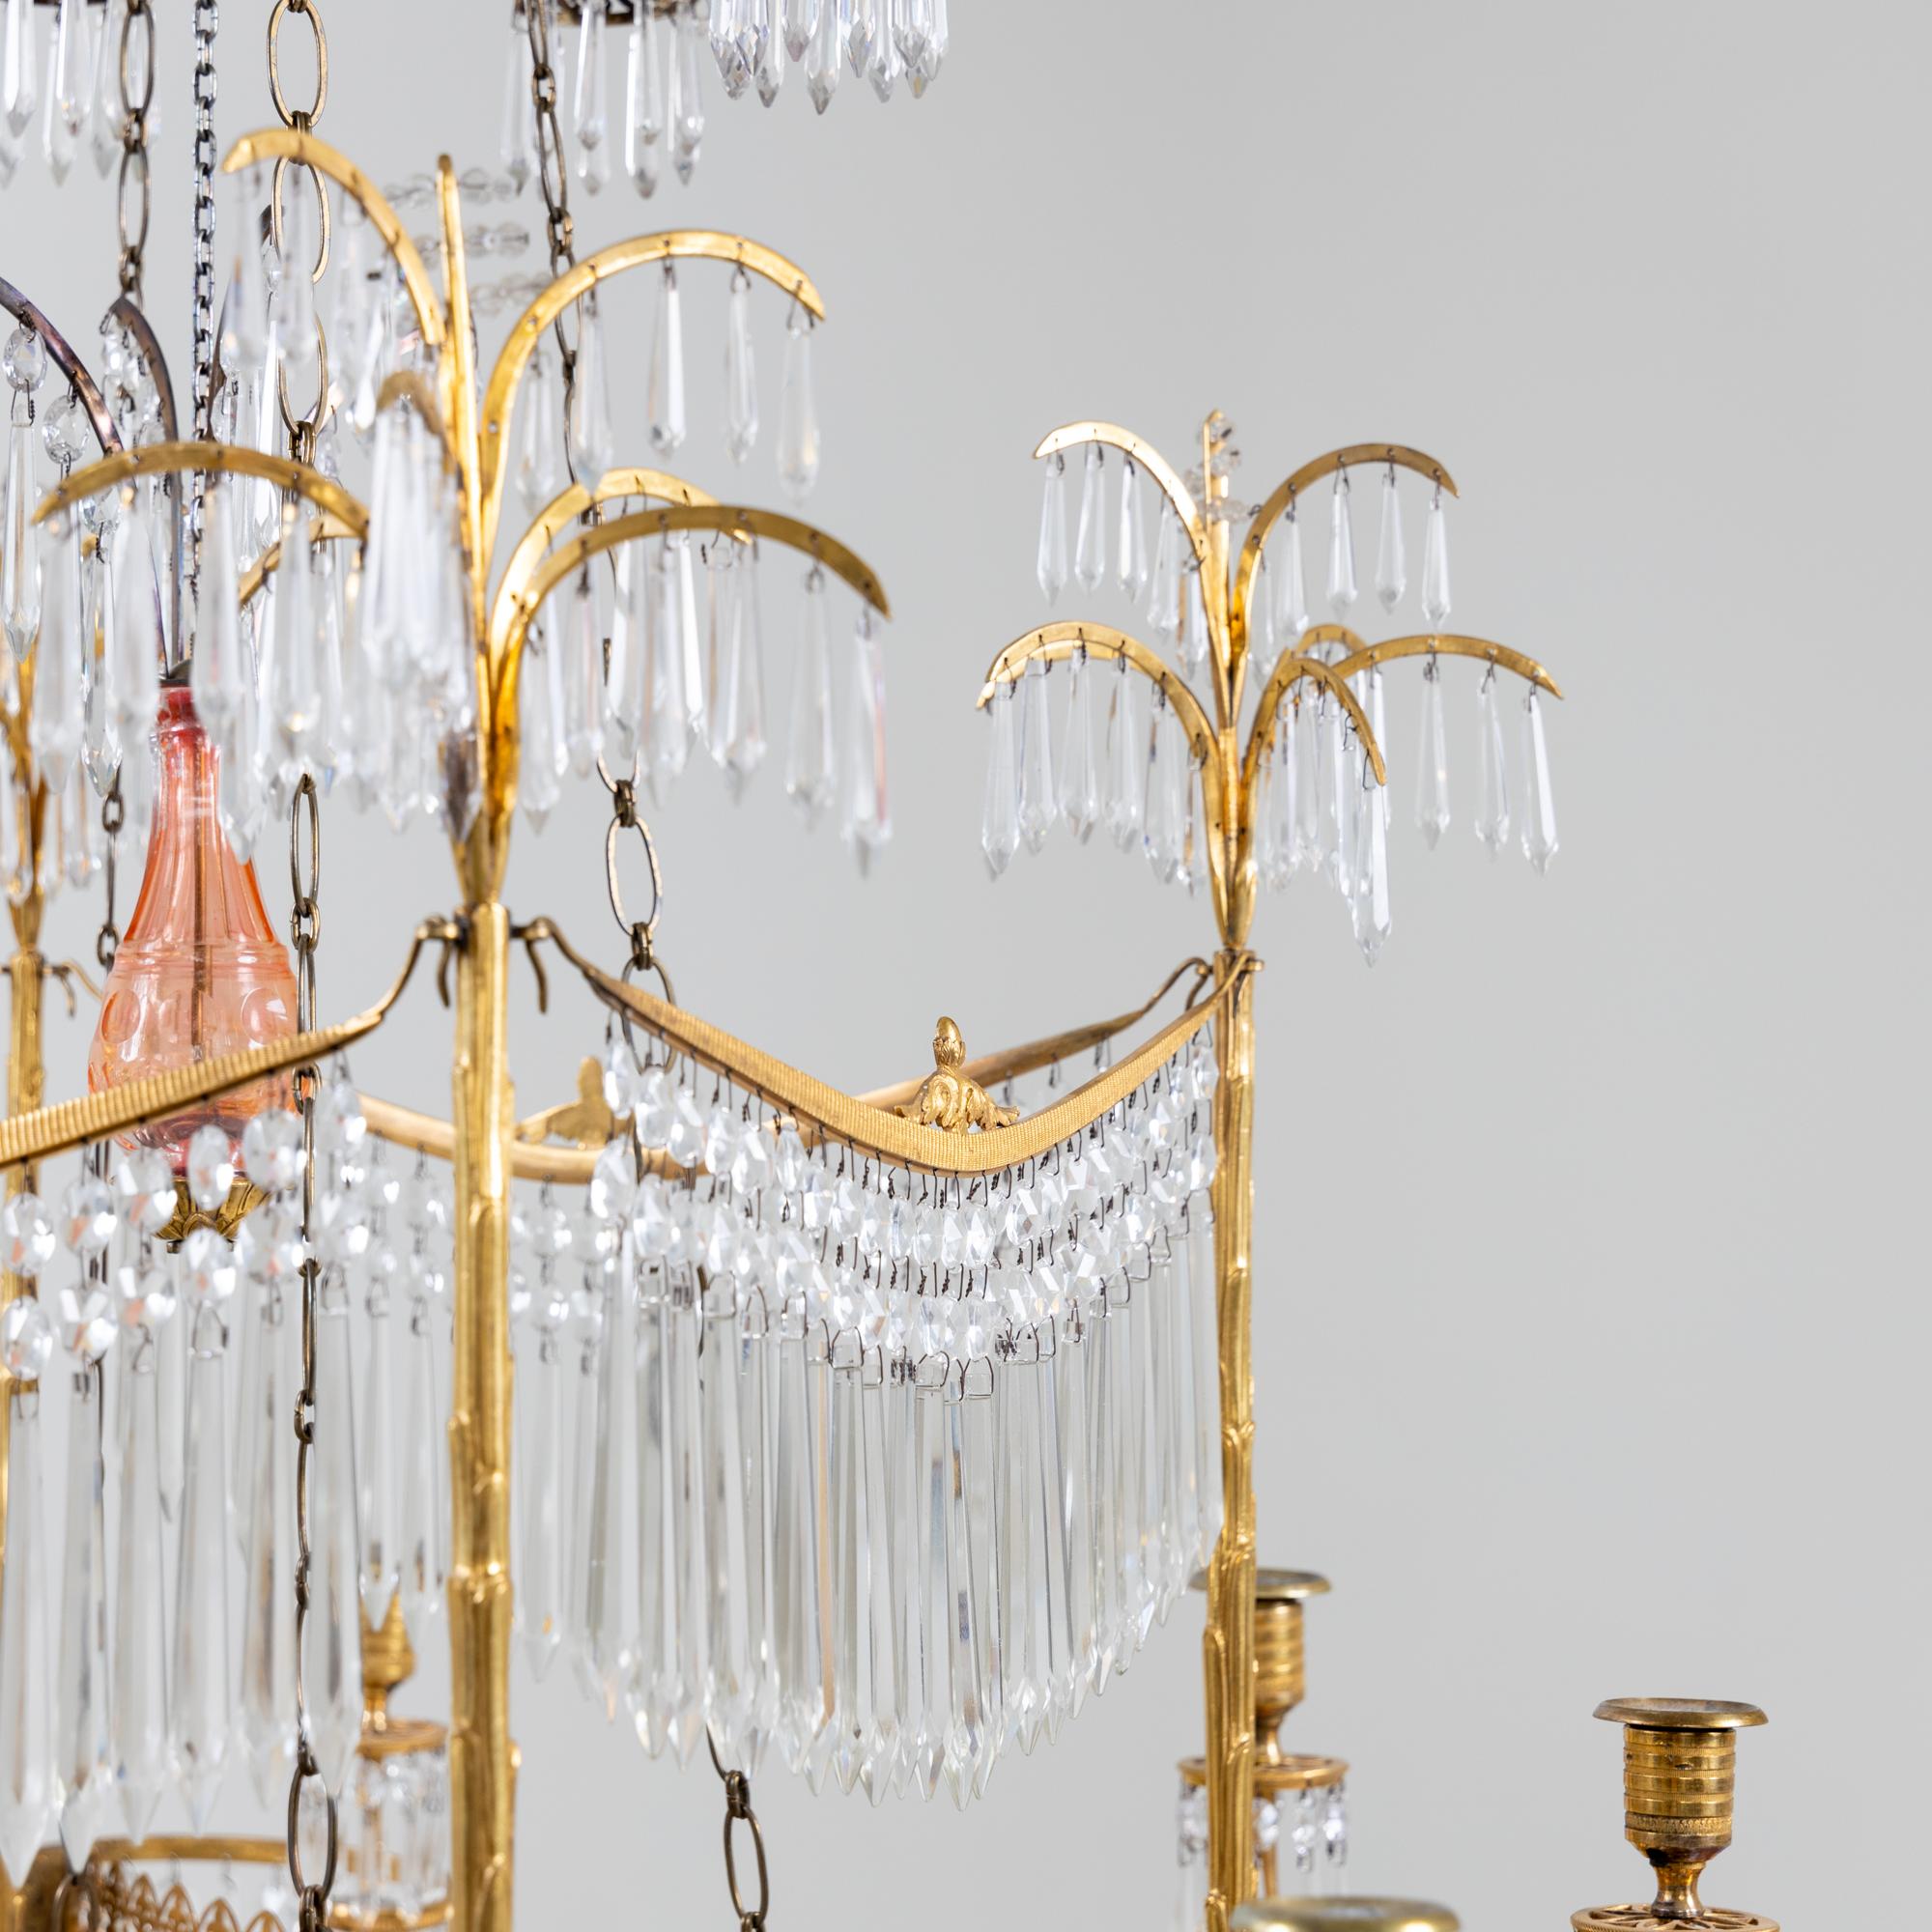 Chandelier with Palm Trees, Werner & Mieth, Berlin c. 1800-1810 For Sale 8